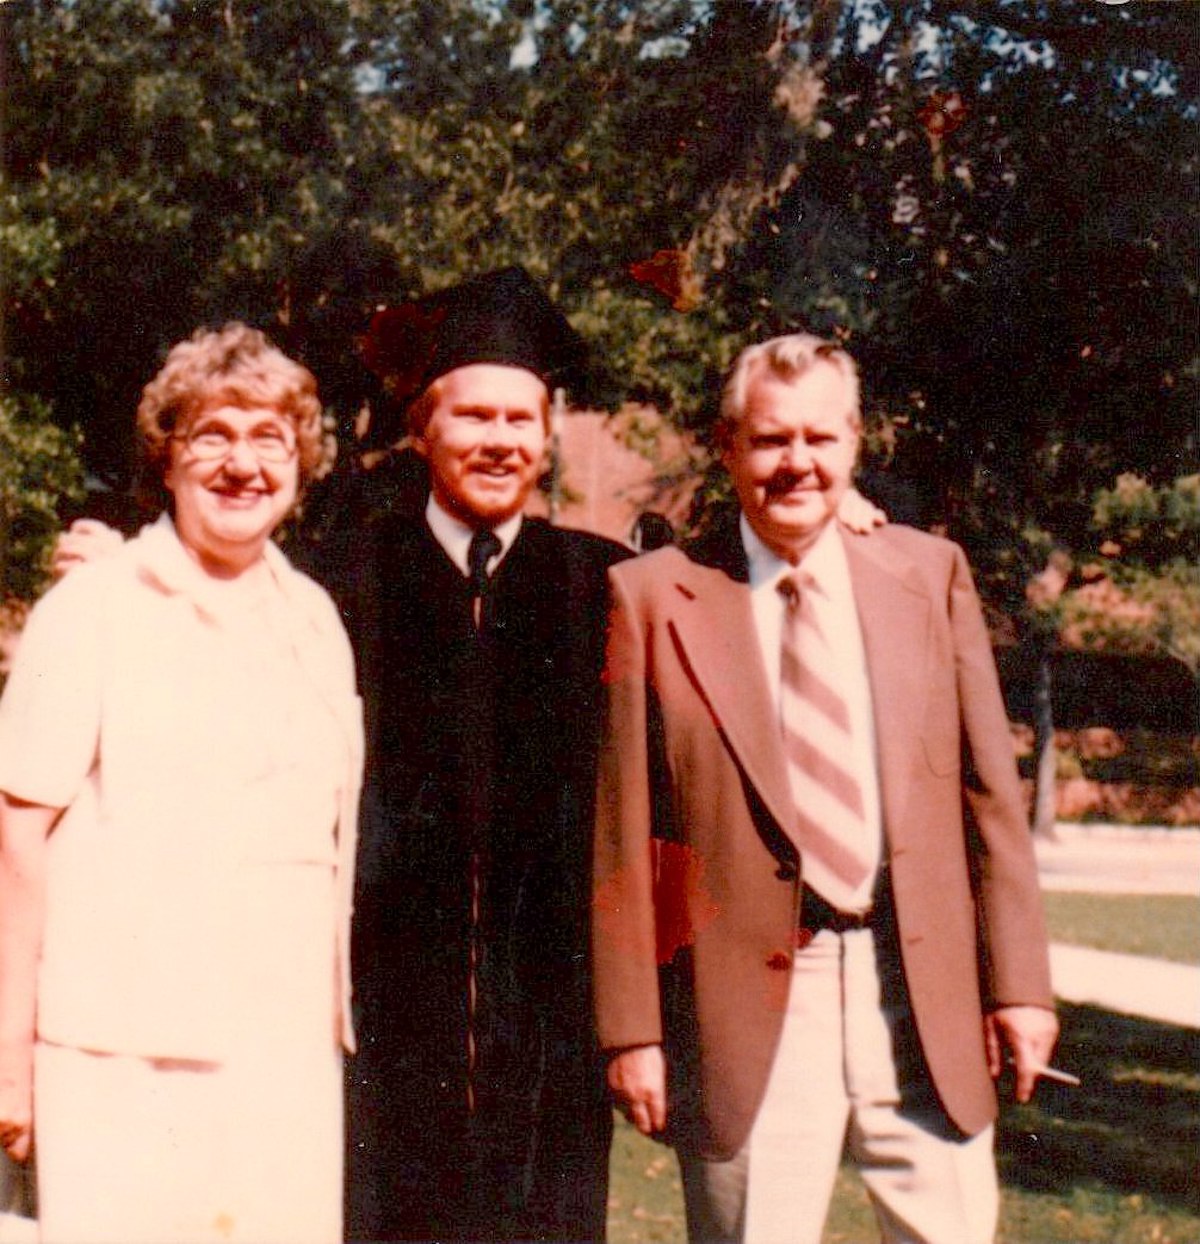 Tom, with his parents, graduating from University of Florida’s Levin College of Law. Tom shares, “I wasn’t out, wasn’t comfortable in my own skin, and wouldn’t pursue a law career for another 15 years.” Photo courtesy of Tom Dyer.